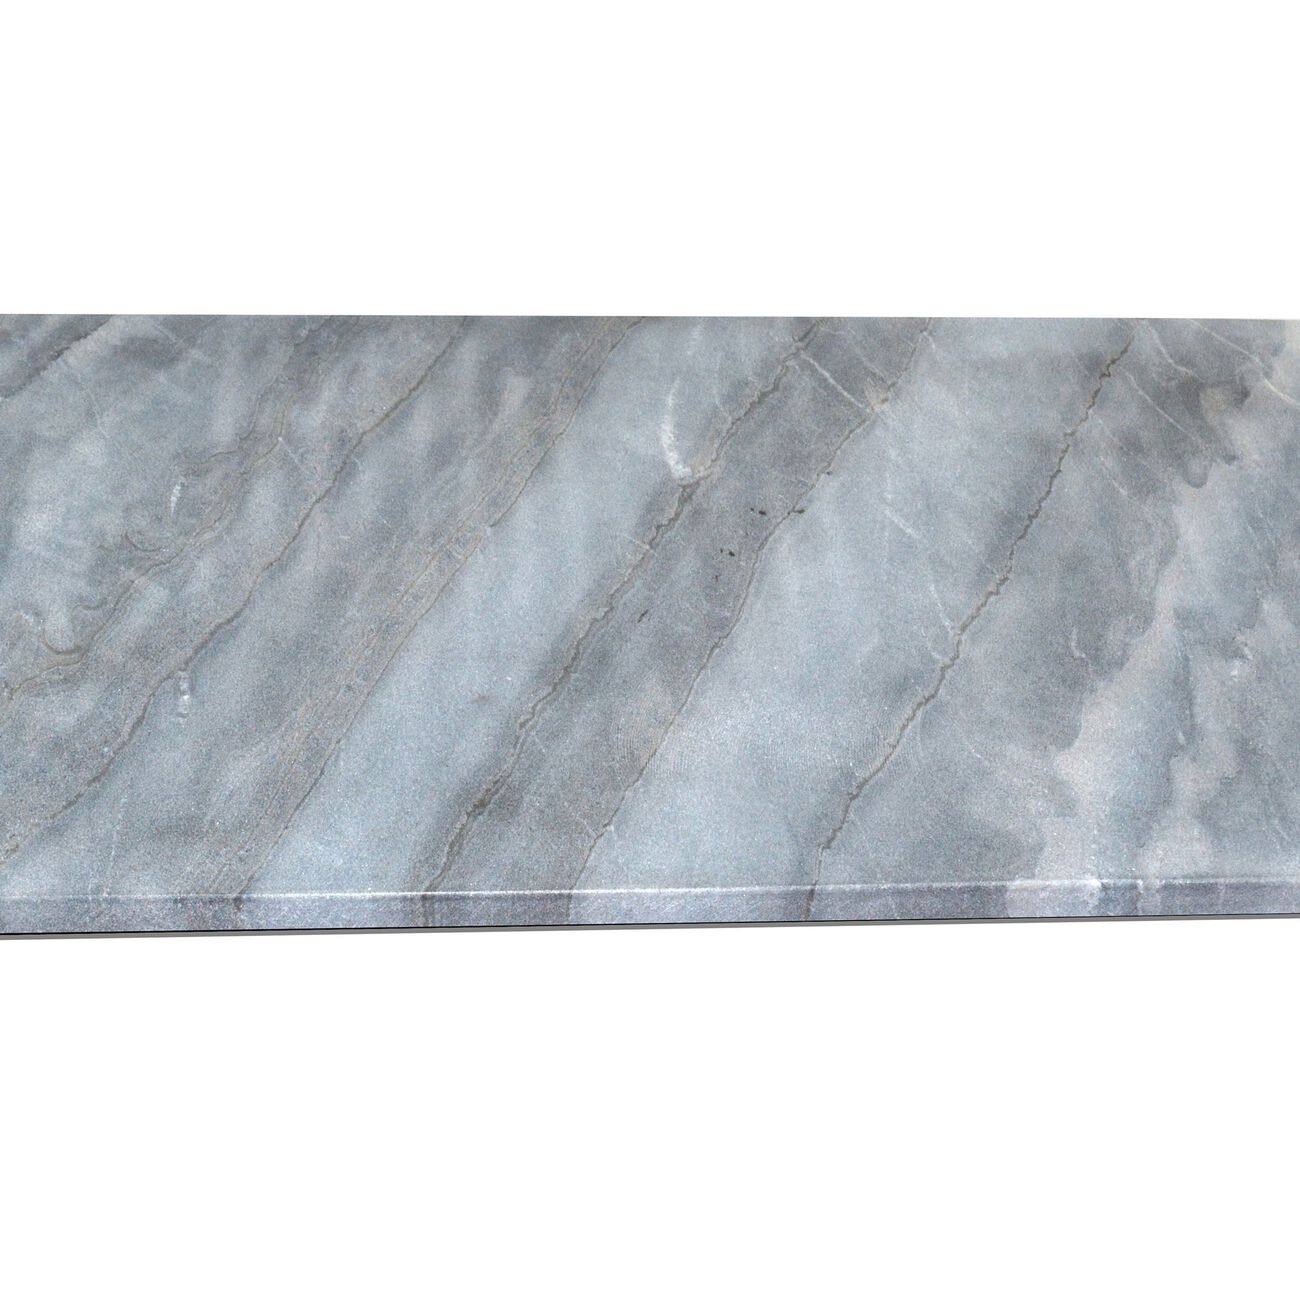 Rectangular Marble Tray with Handles, Gray and Chrome